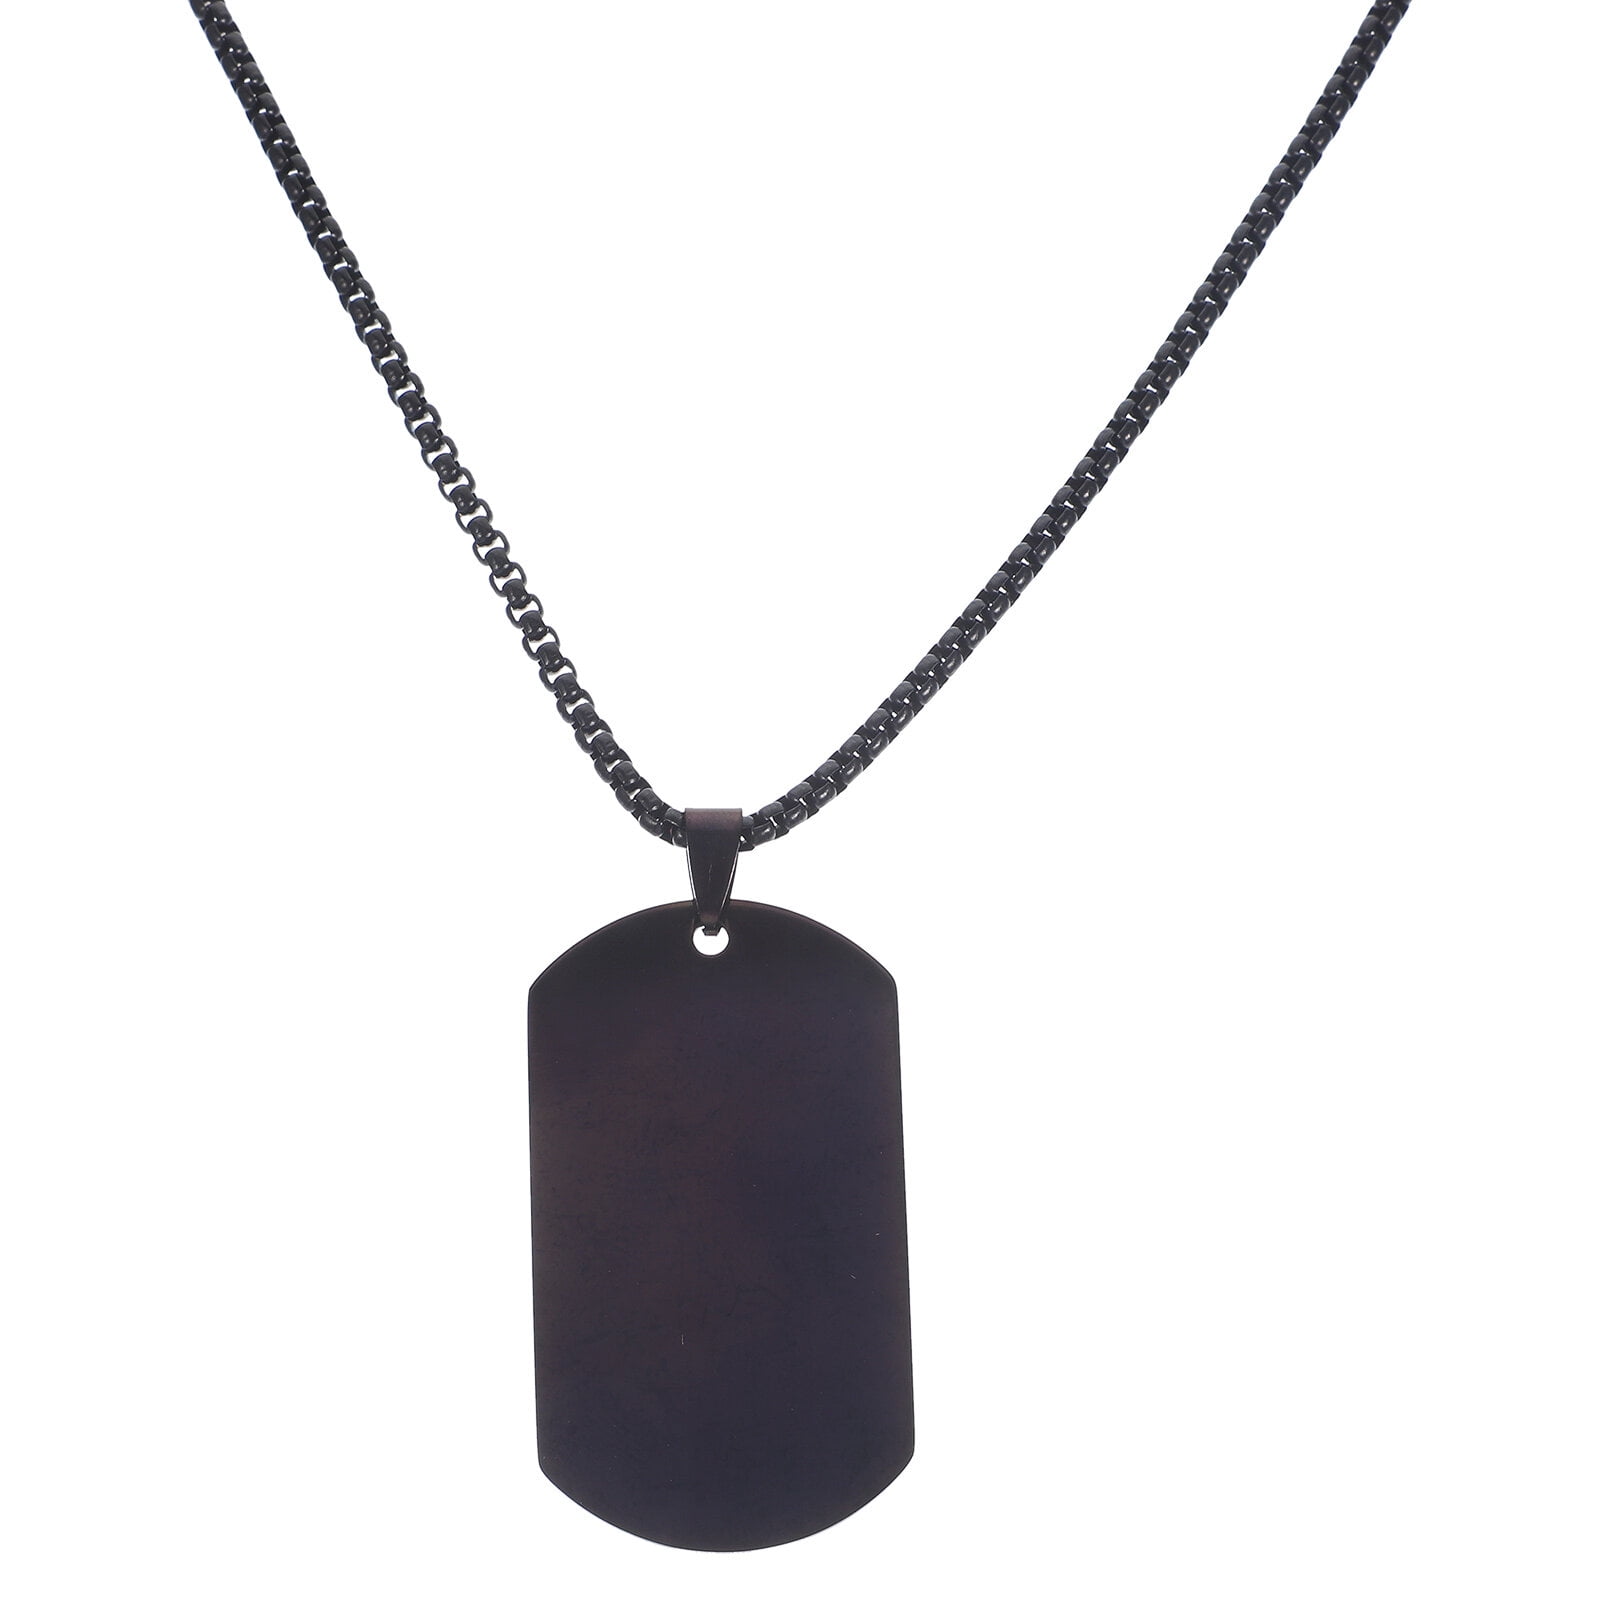 Jewelry Men's Necklace, Style Tags Dog Tag Alloy Pendant with 68c mi